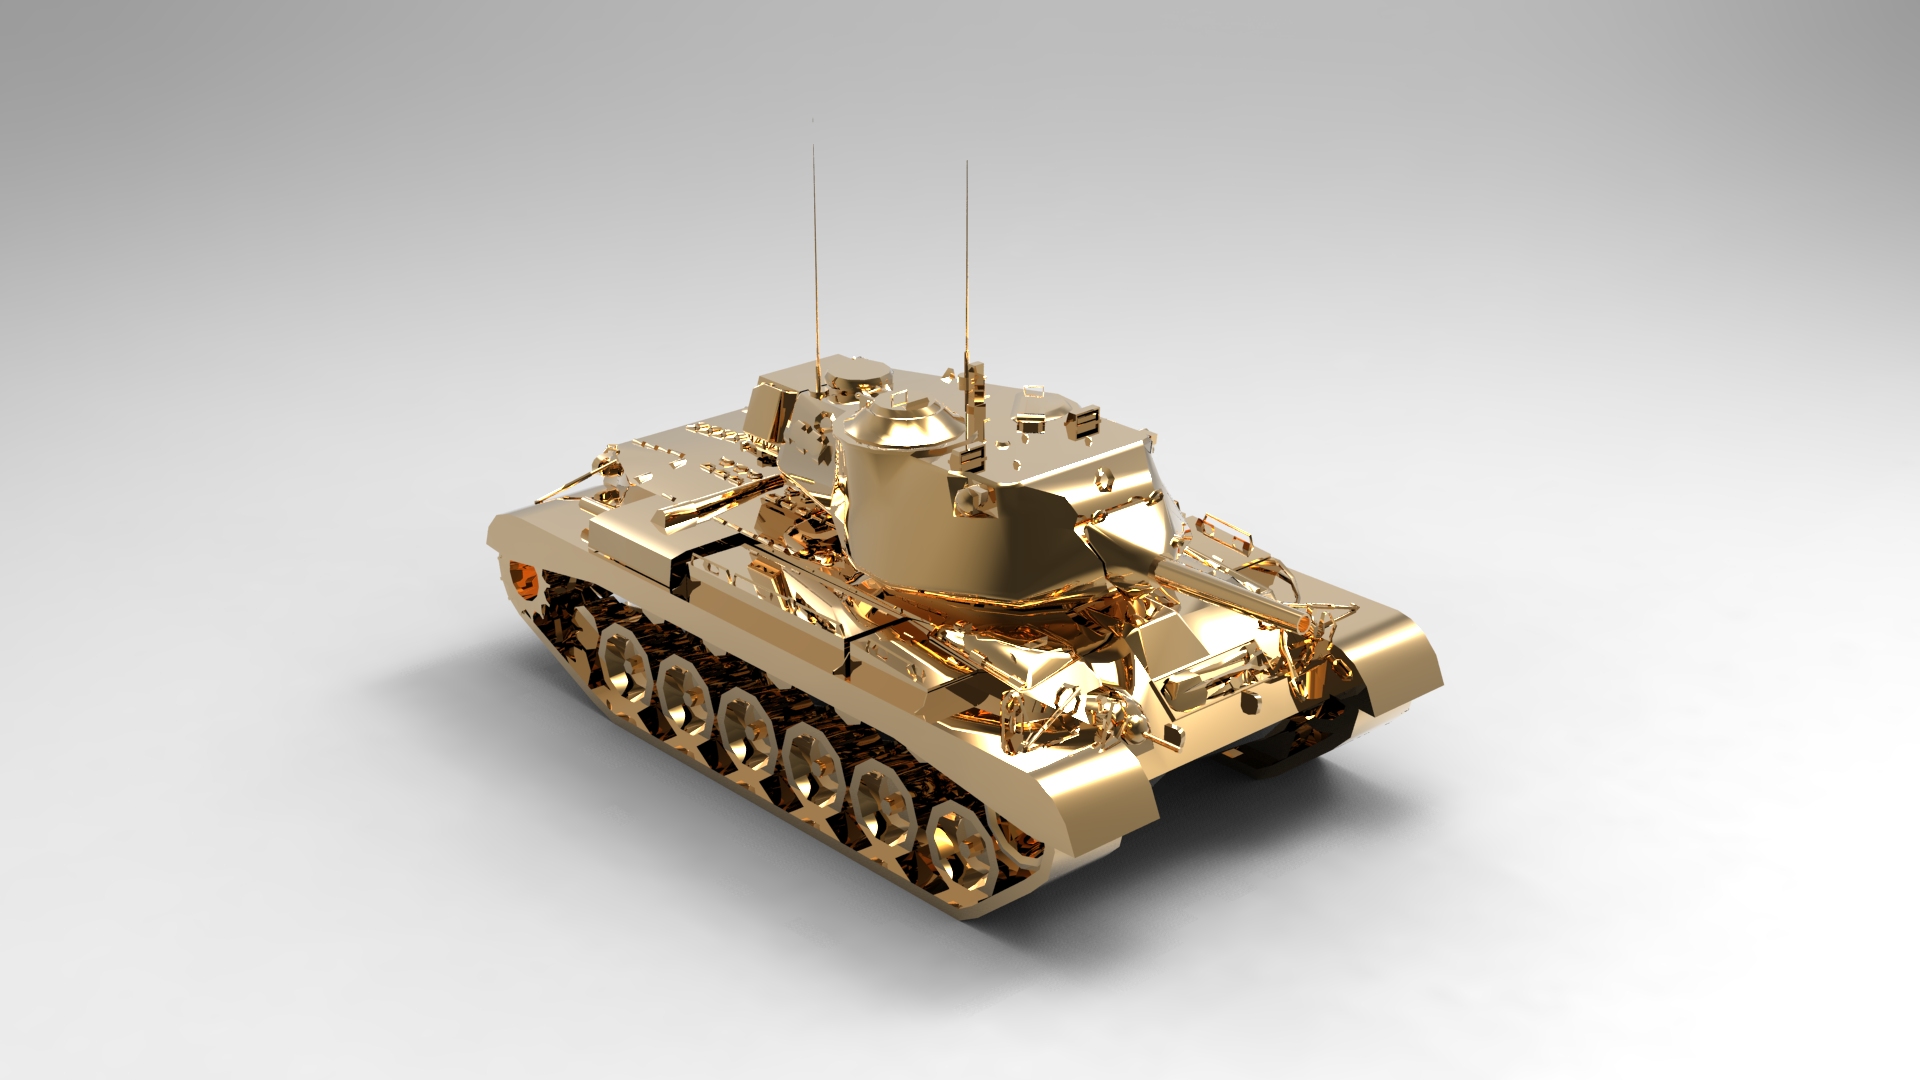 Tank renders - Mods - World of Tanks official forum